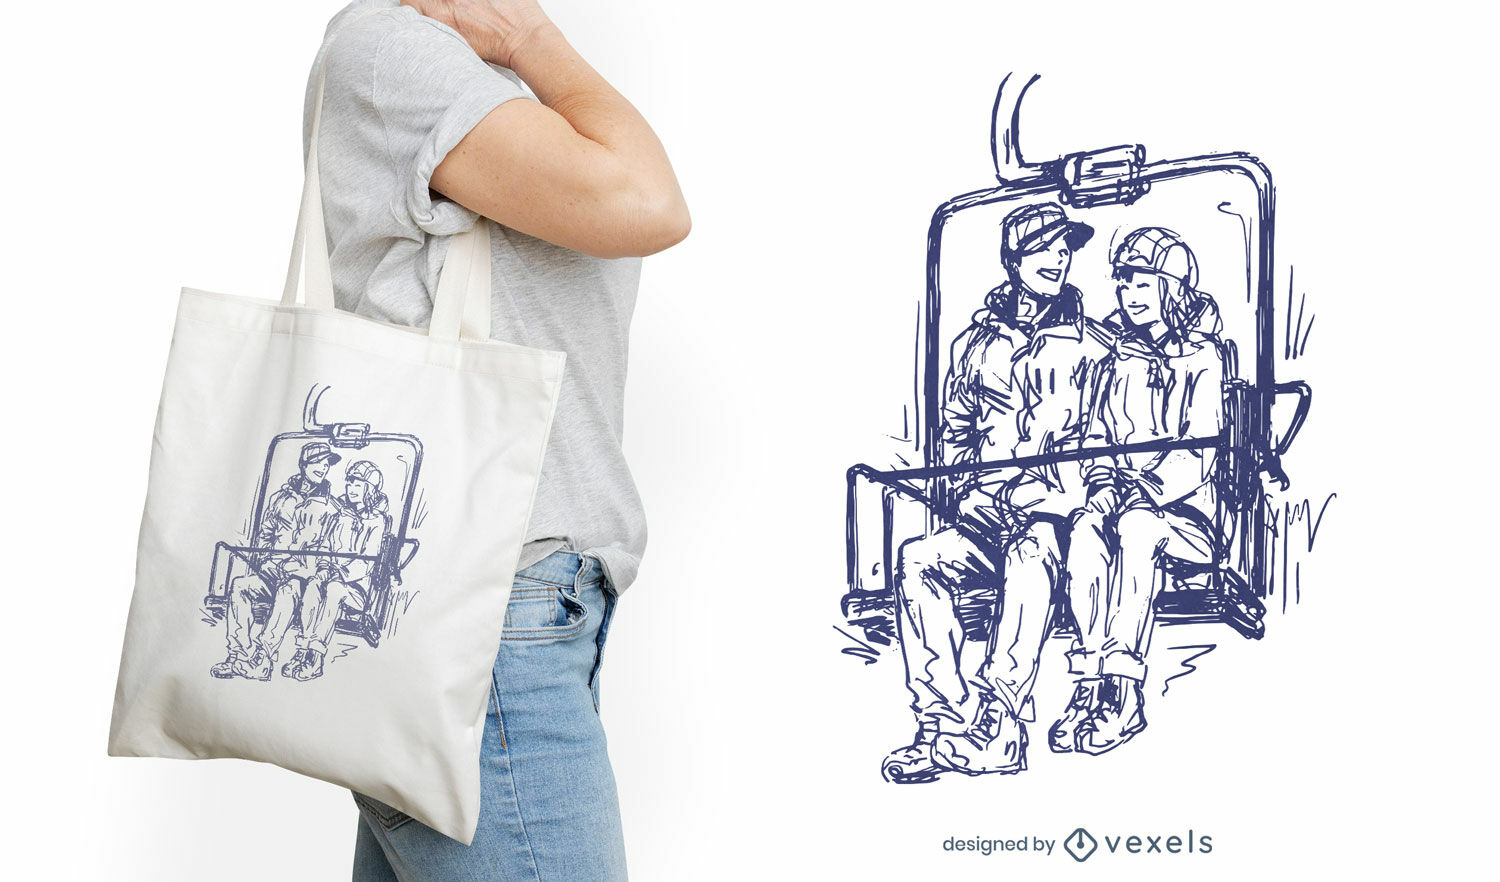 Chairlift adventure tote bag design